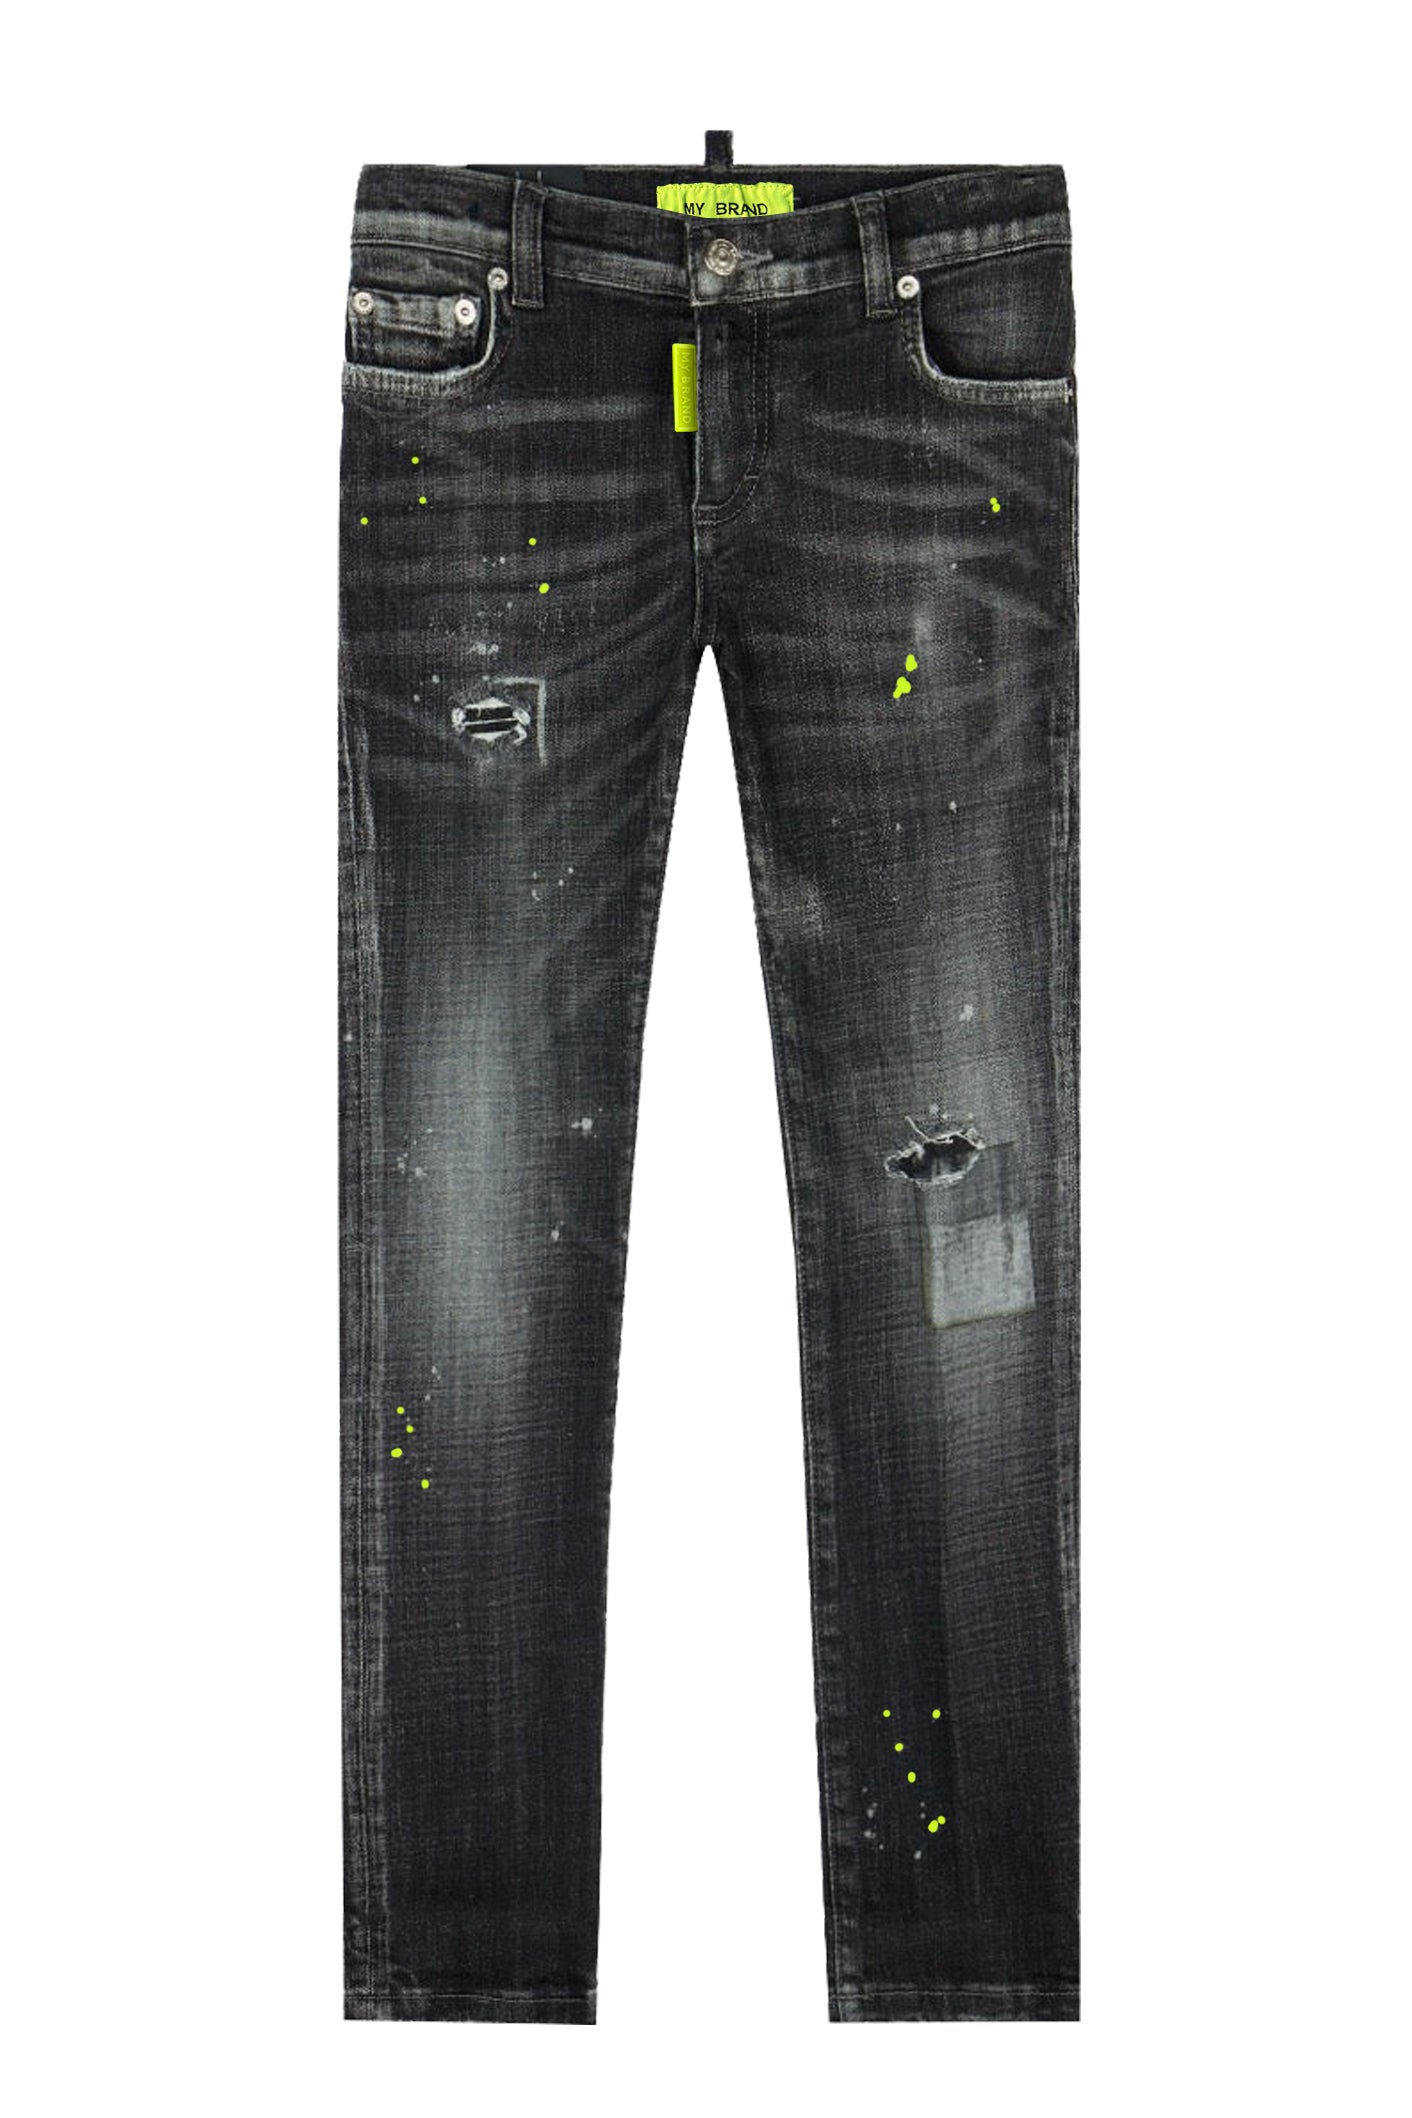 Black Distressed Neon Yellow Jeans